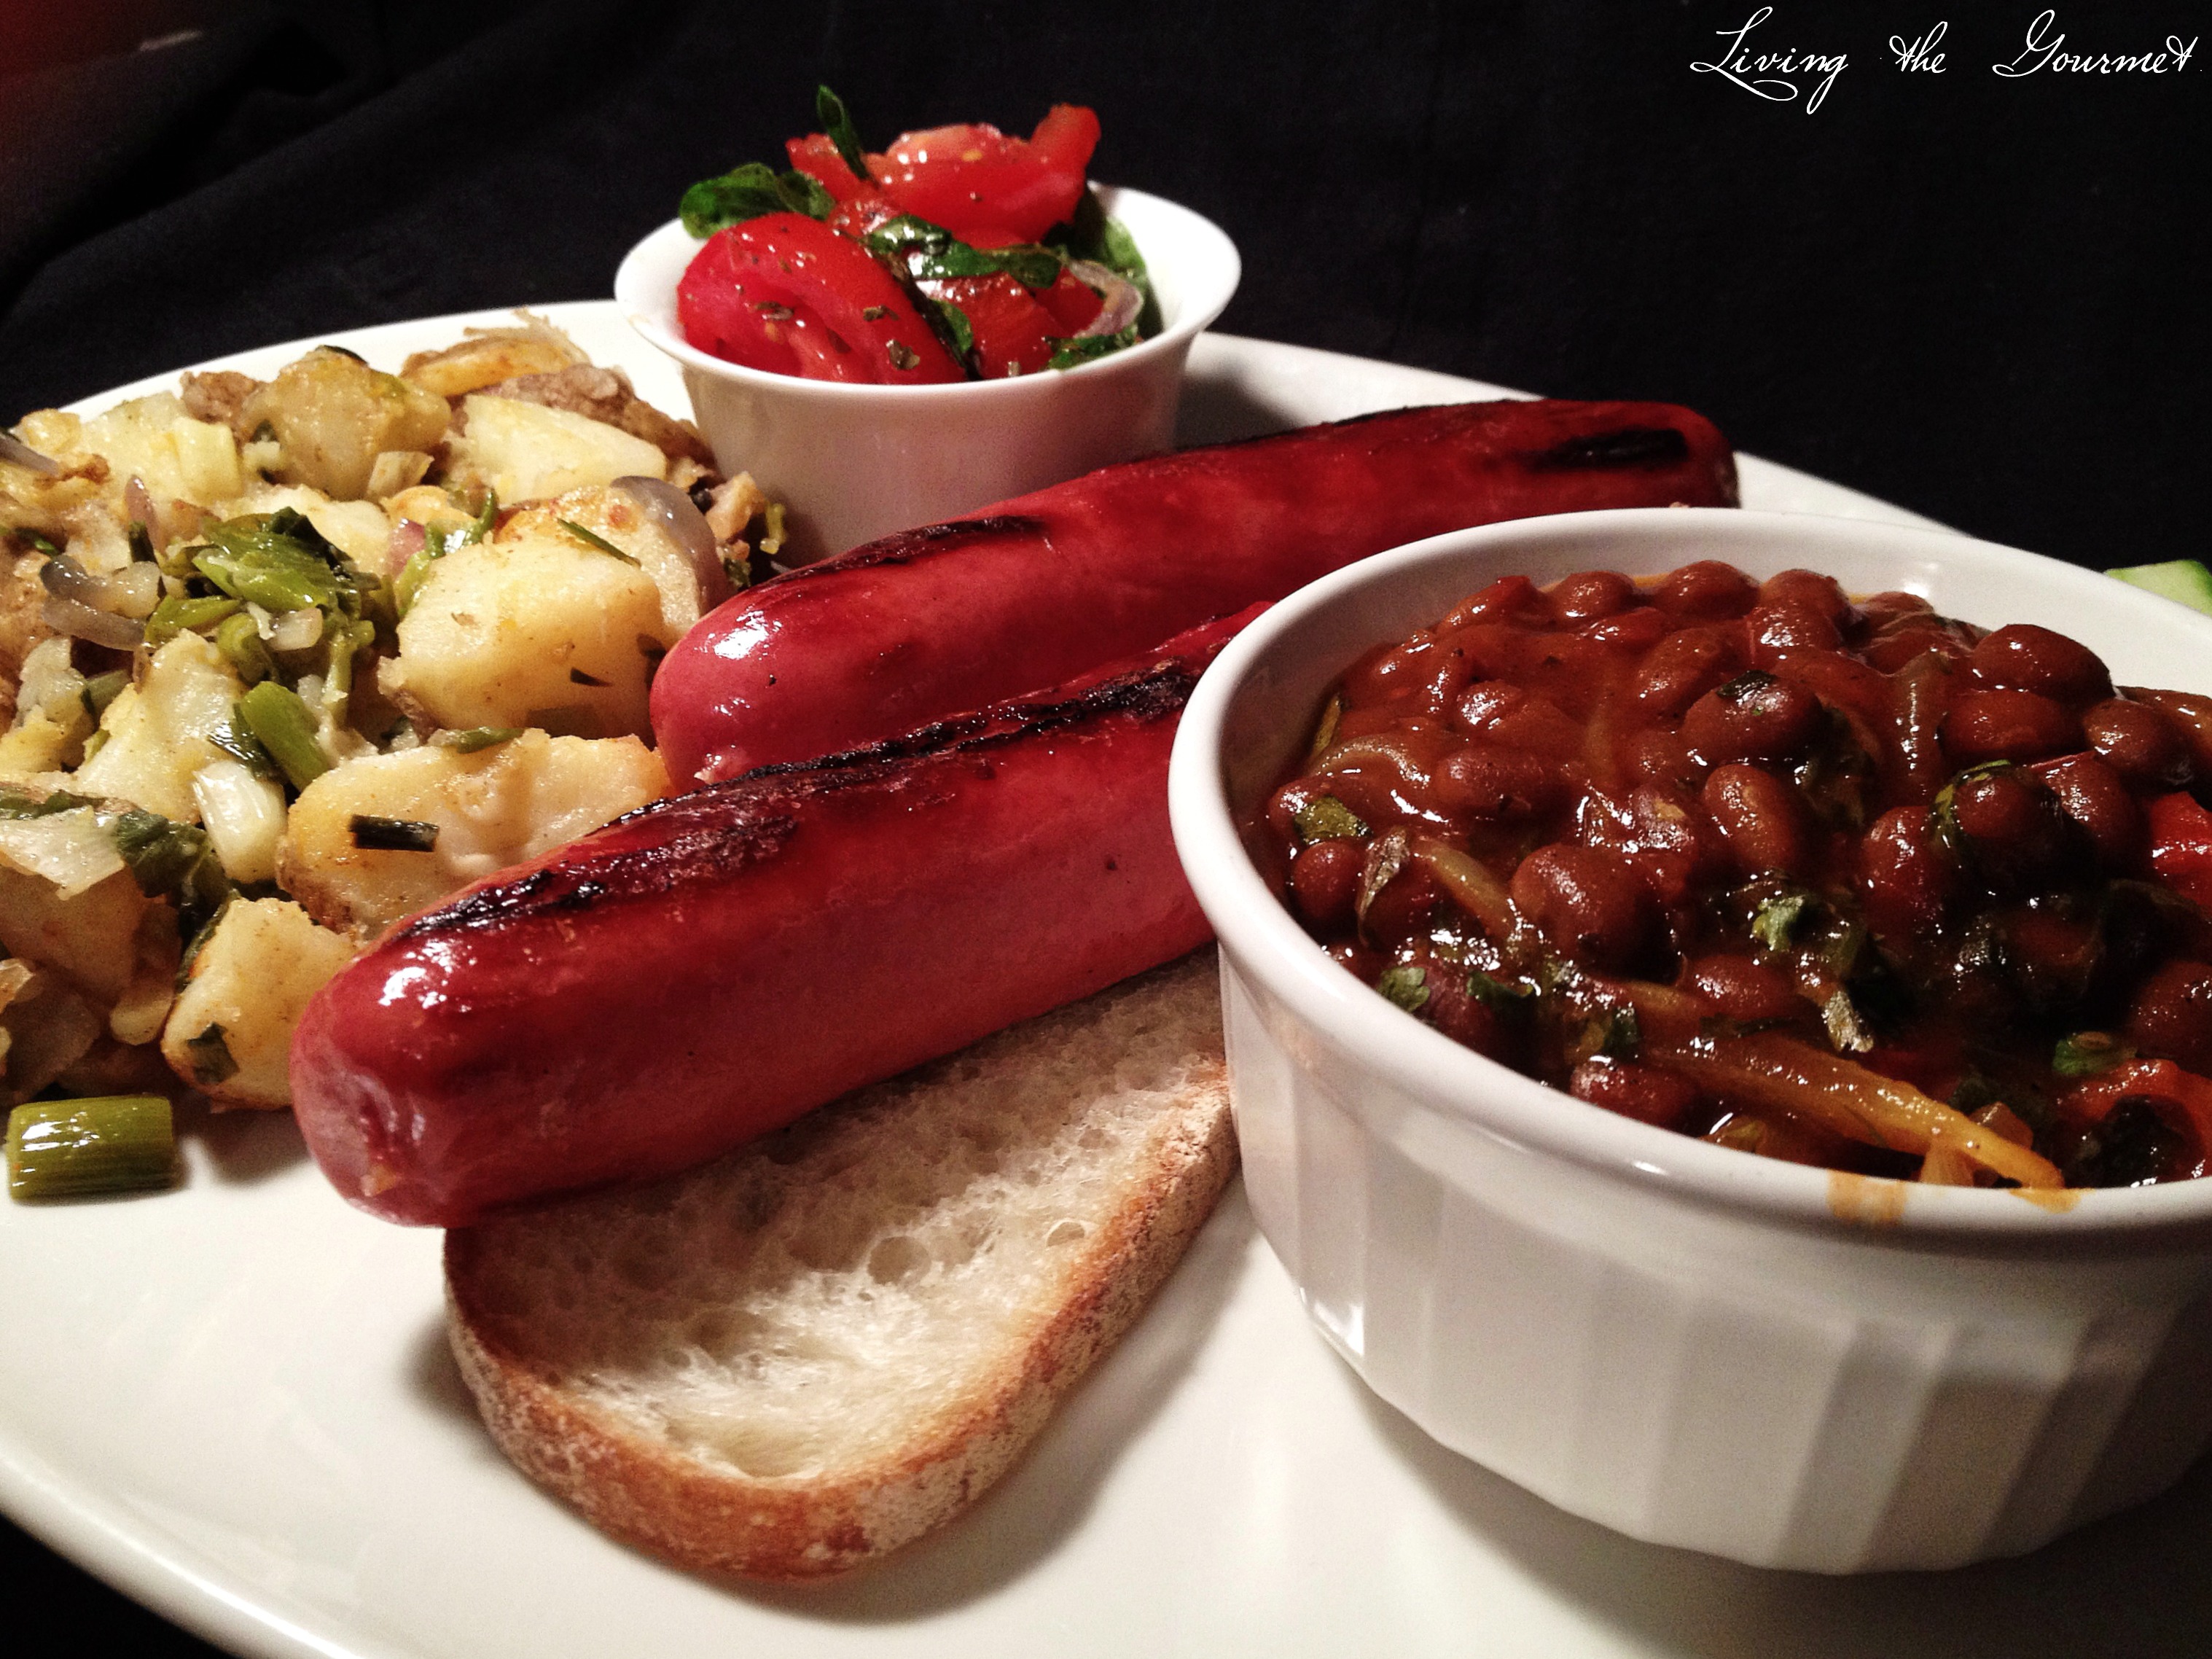 Steak Dogs with Beans, Home Fried Potatoes and Tomato Salad